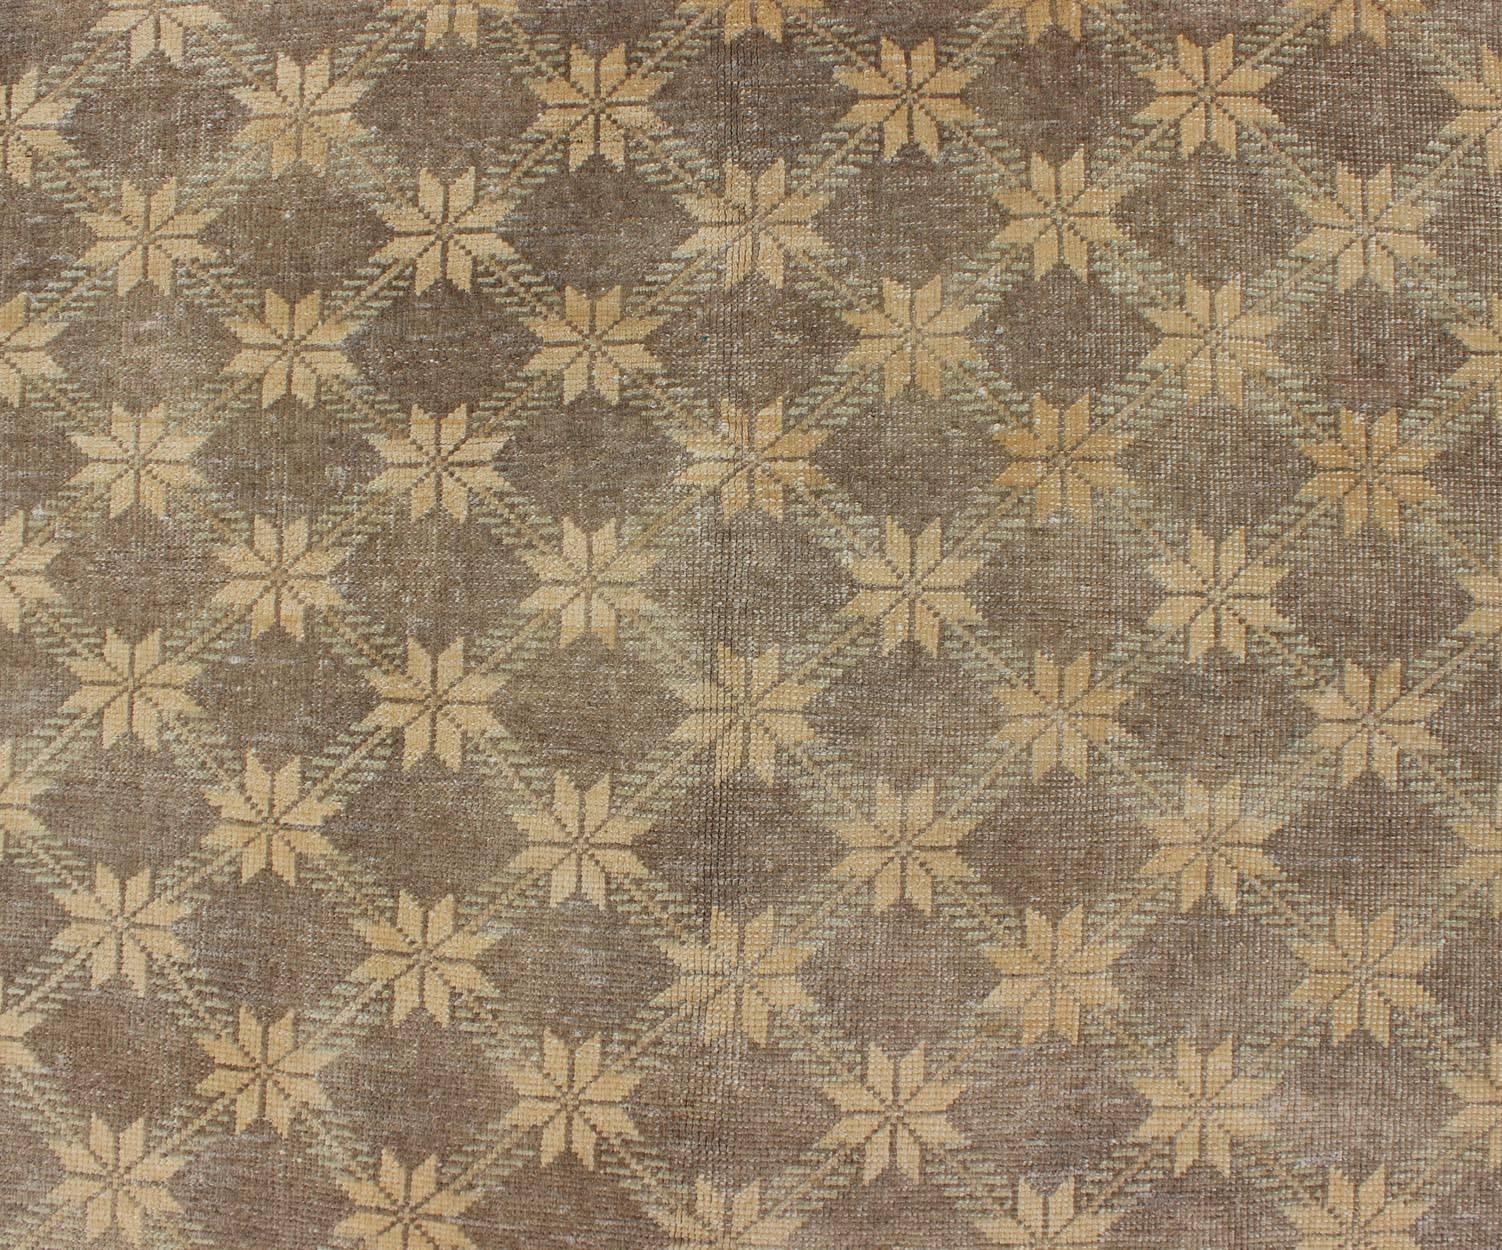 Wool Brown Midcentury Vintage Turkish Oushak Rug with Floral or Star Lattice Pattern For Sale